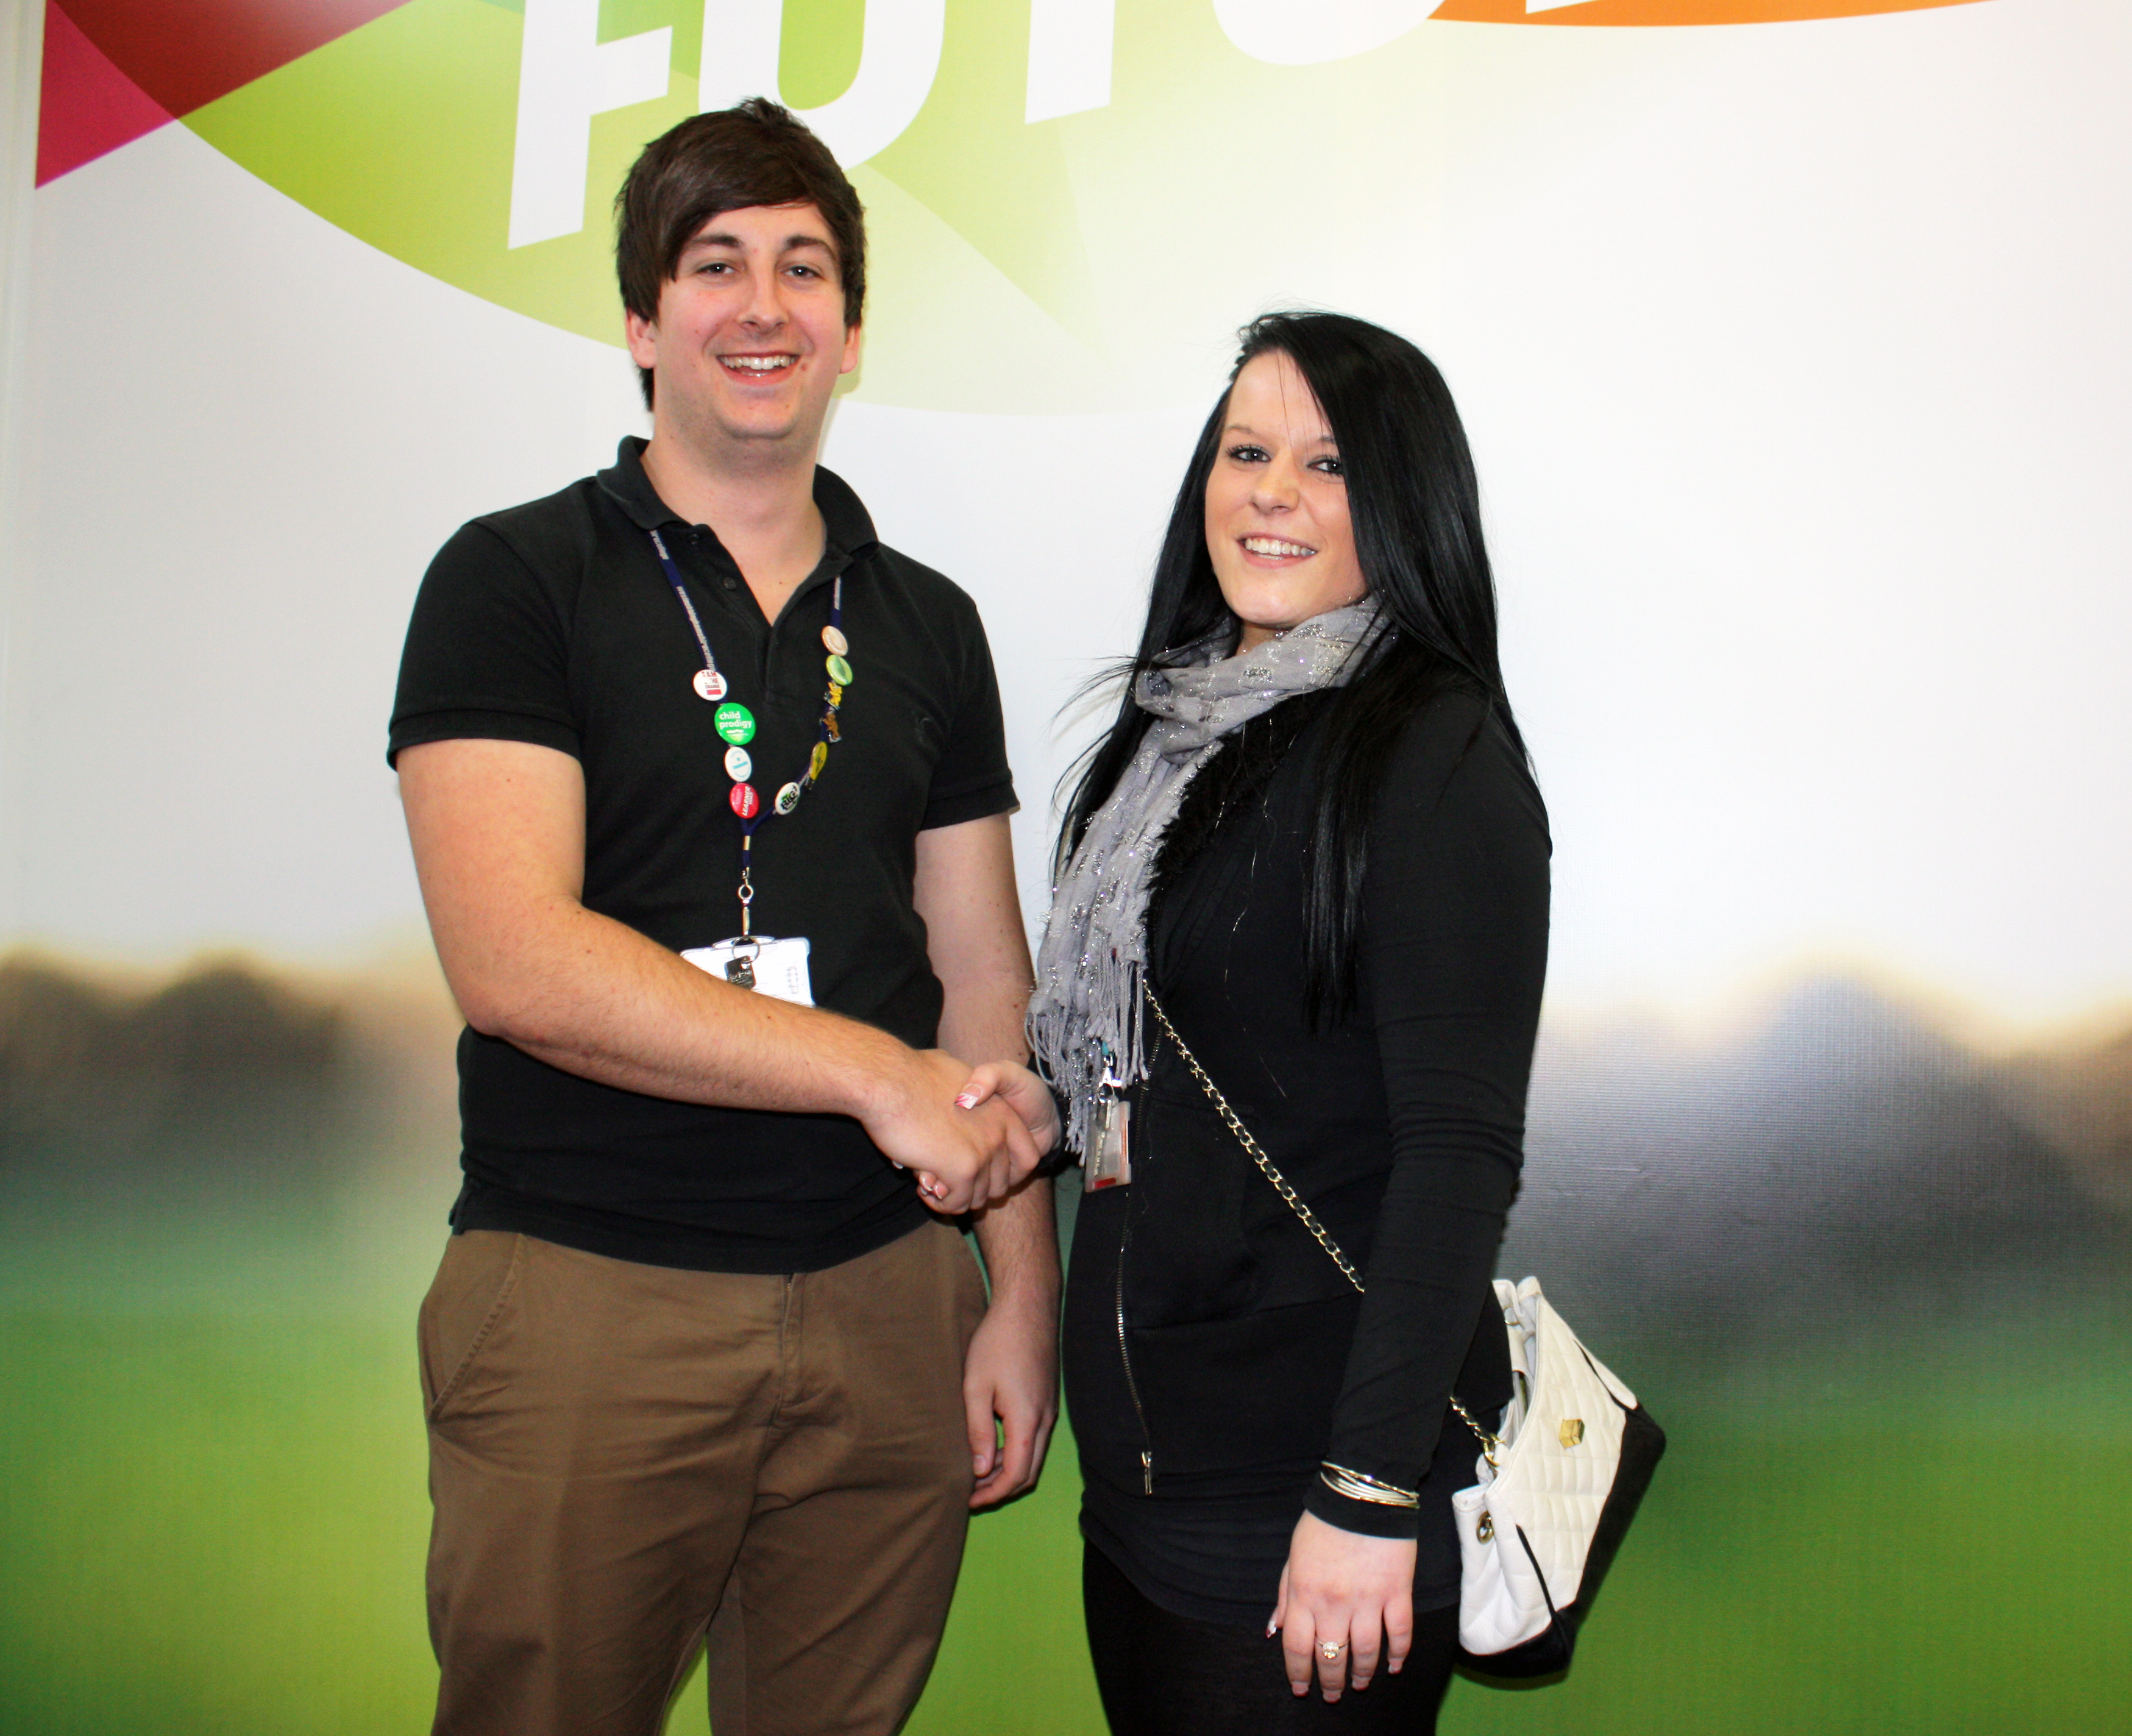 Current president of the SU James Stafford congratulates Marie Oakton on her role as president for next academic year